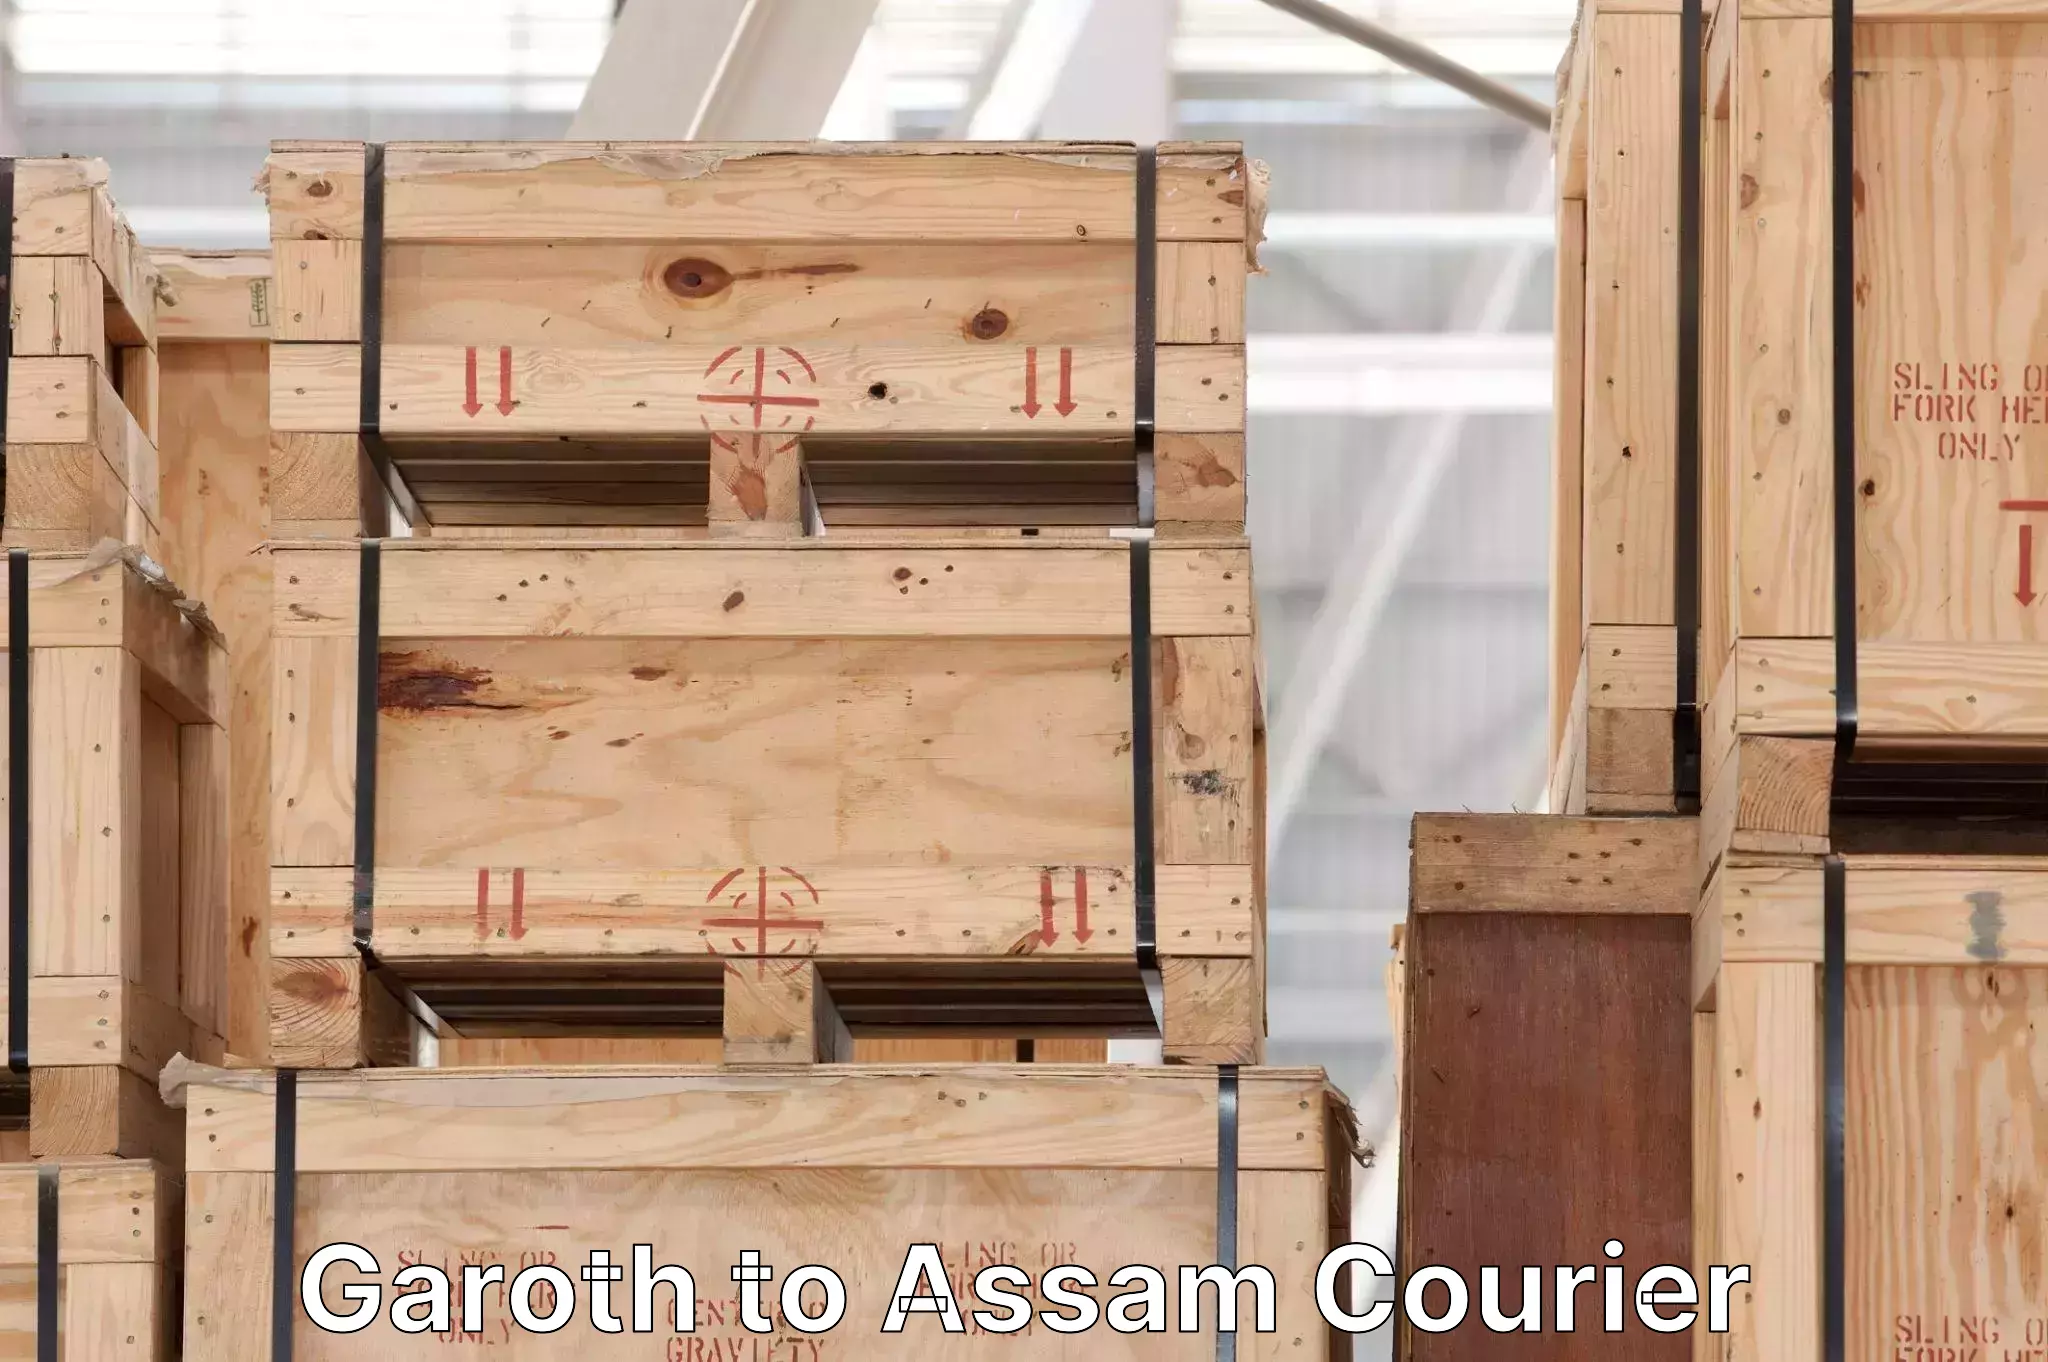 Automated parcel services Garoth to Assam